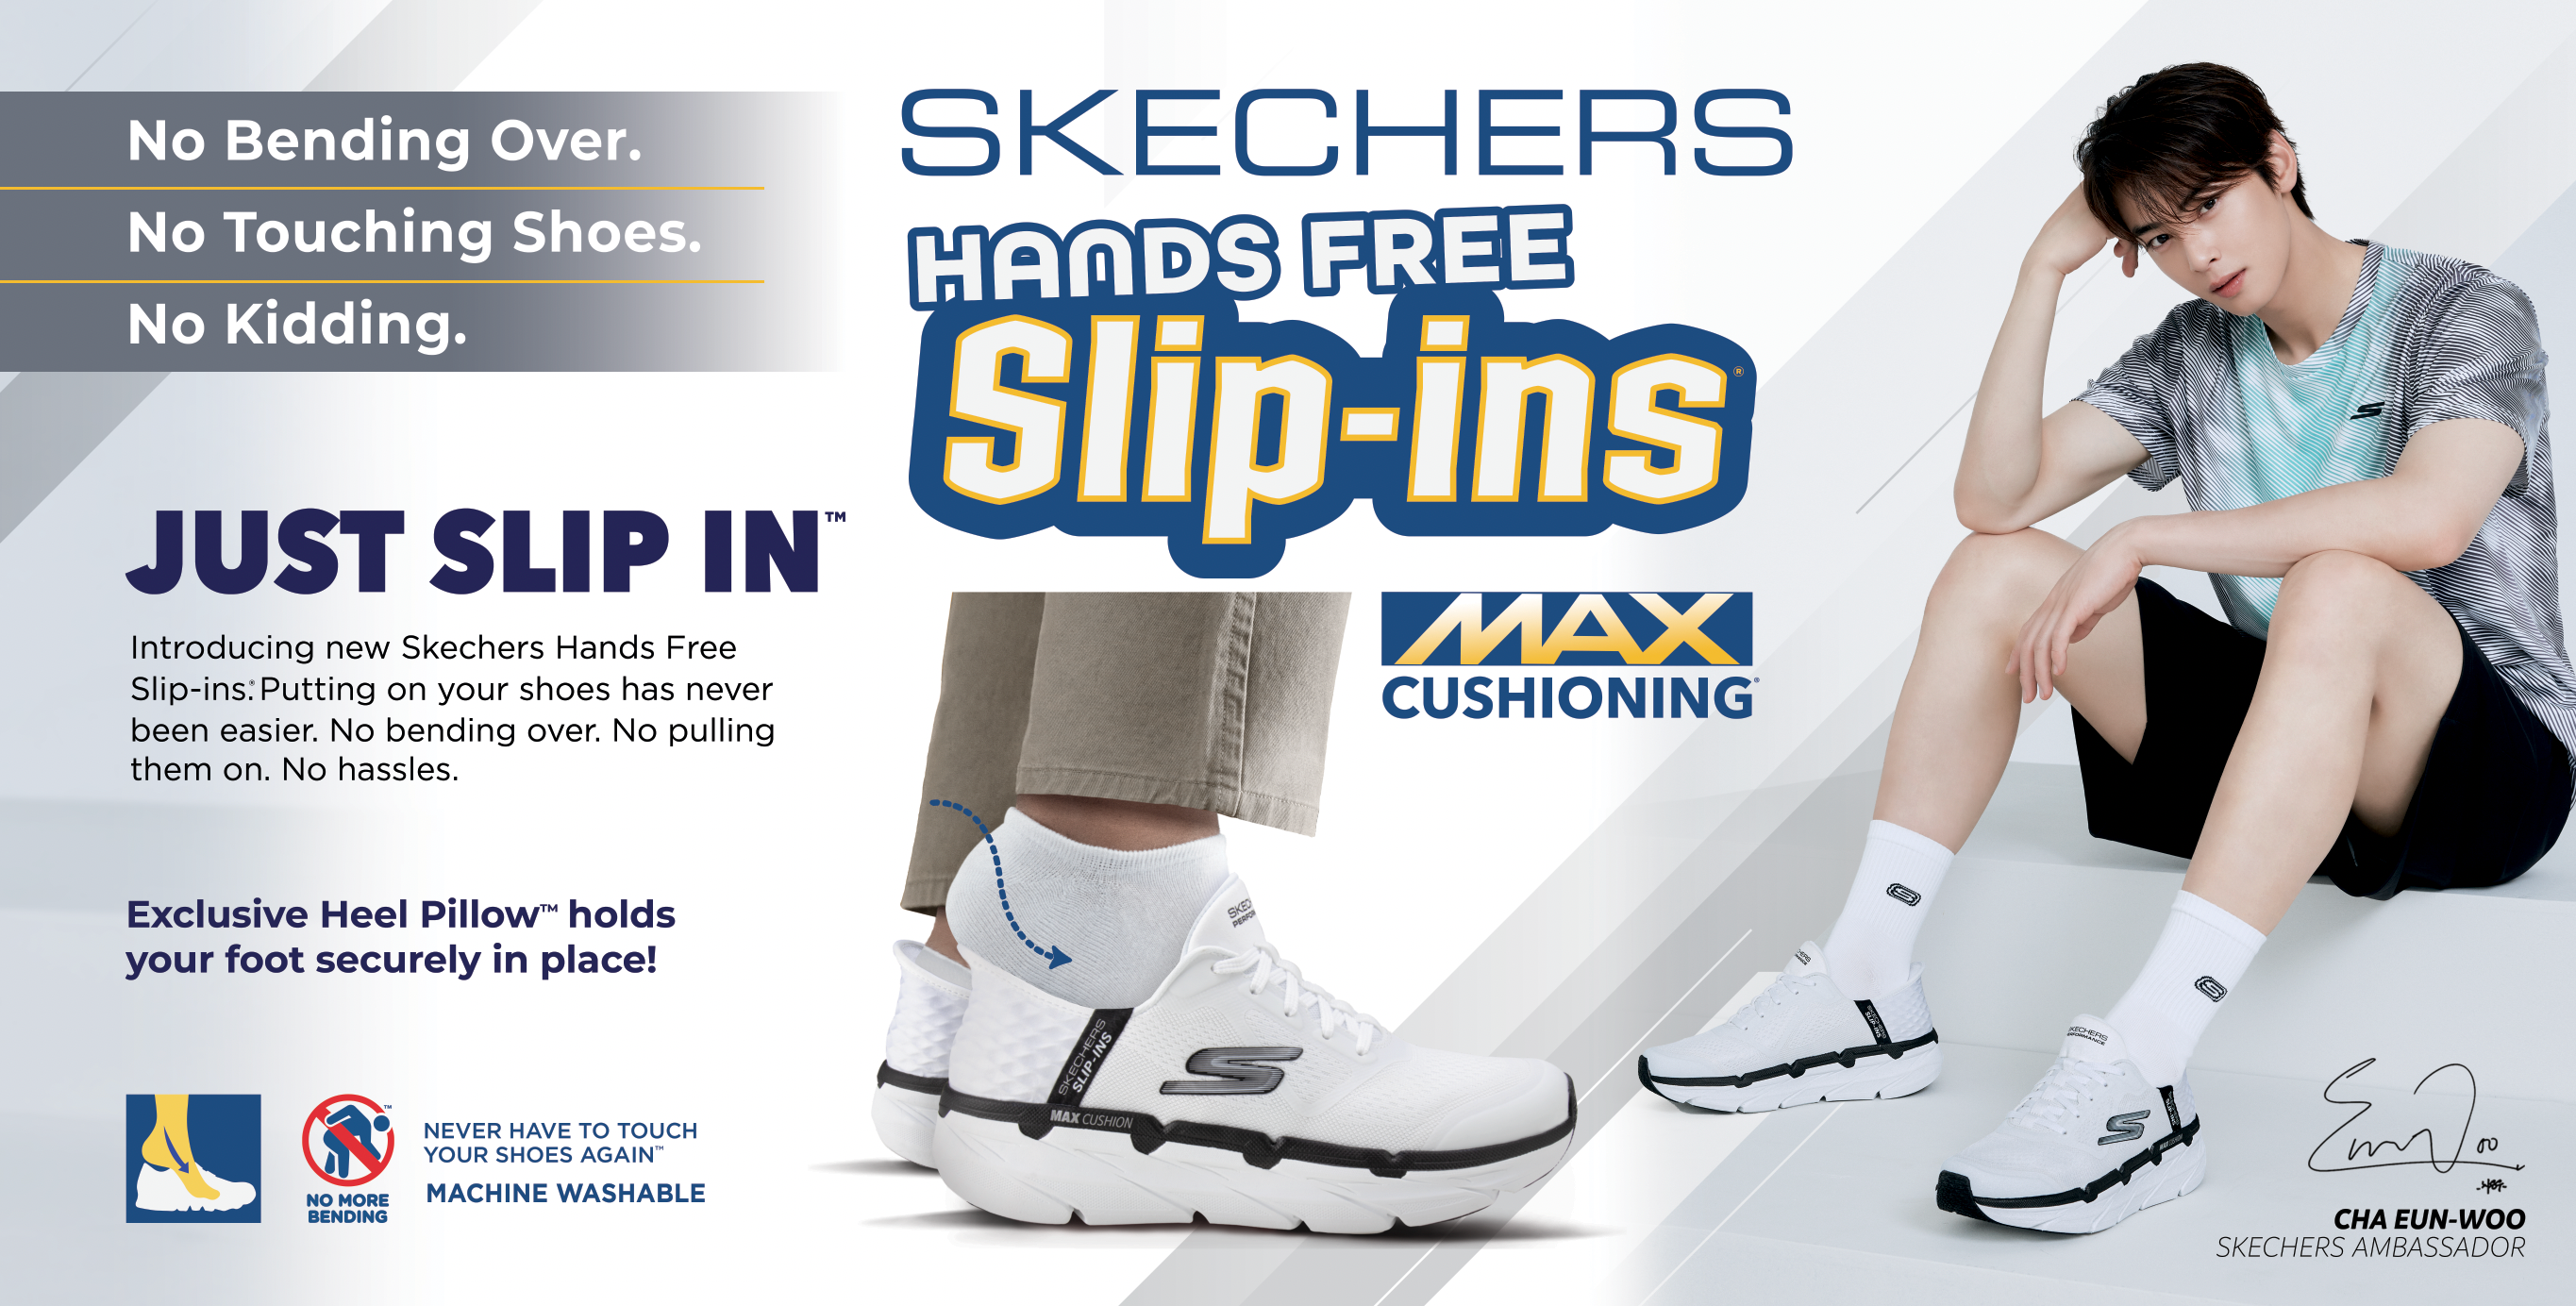 SKECHERS - The leaders in walking technology present the next